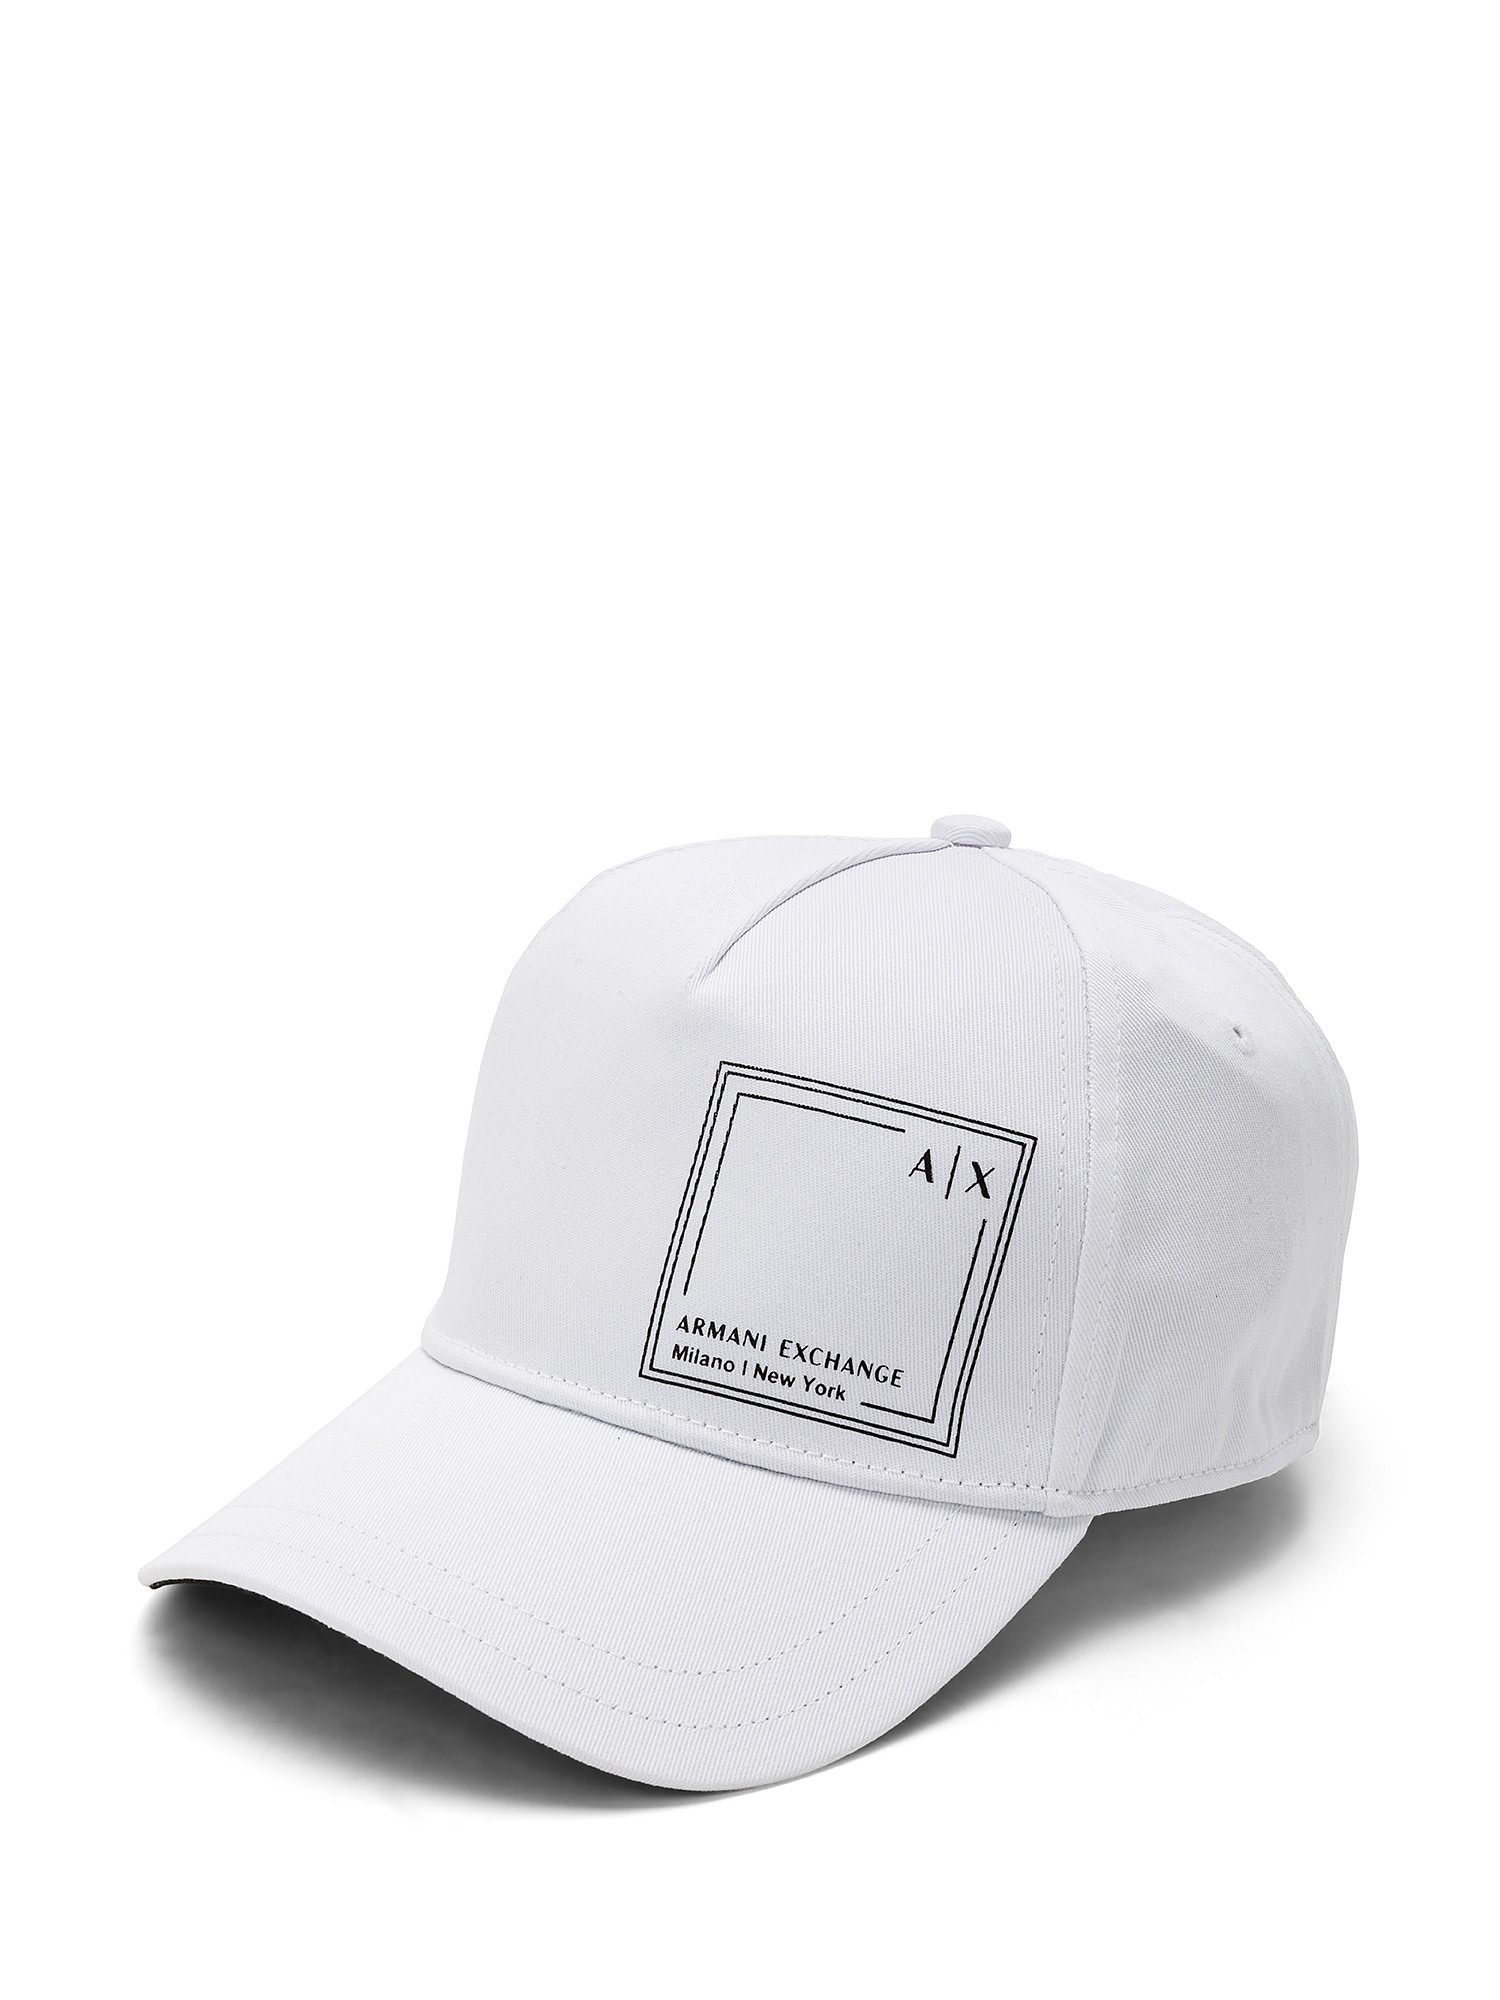 Armani Exchange - Cappello baseball in cotone, Bianco, large image number 0